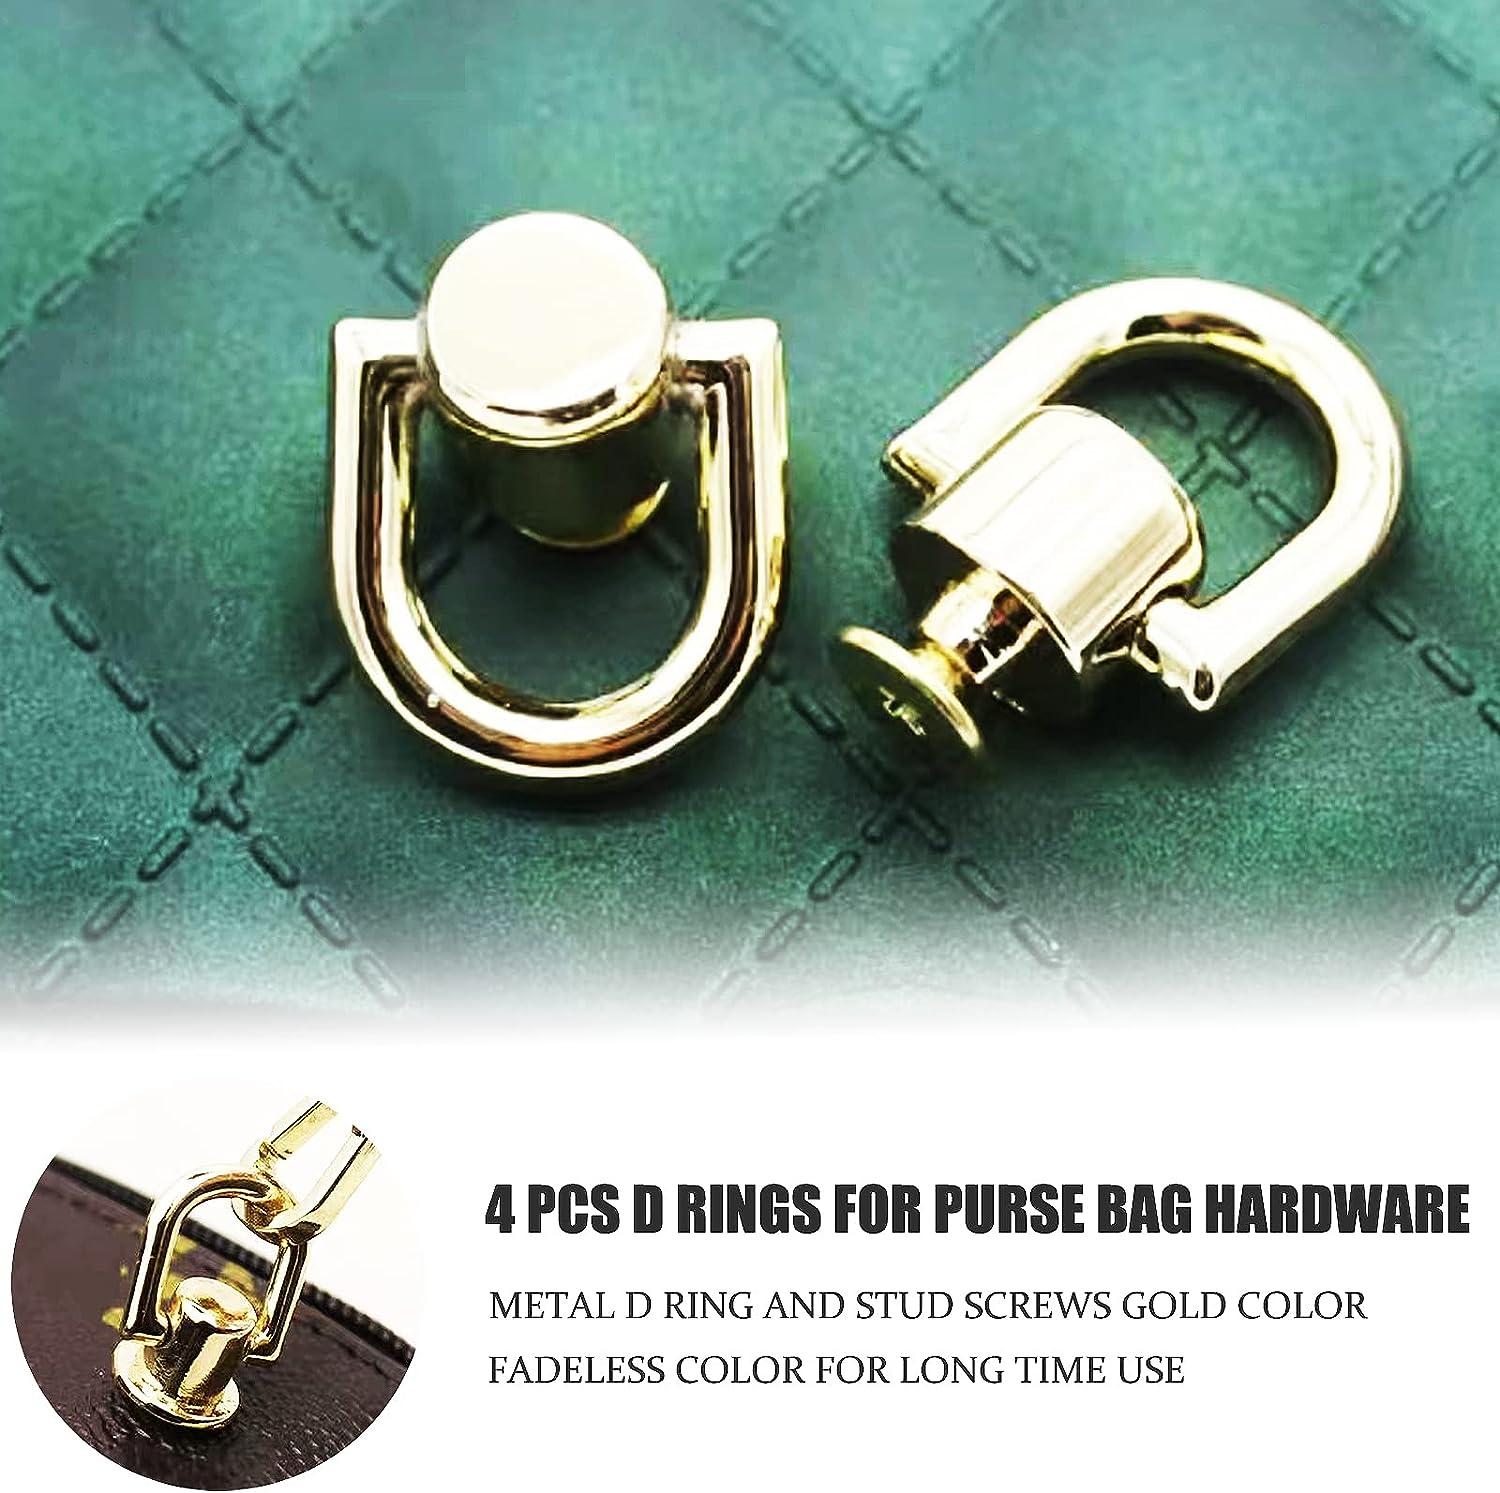 Amazon.com: D Rings for Purse Hardware for Bag Making, 12 PCS Metal D Ring  and Stud Screw, 360 Degree Rotatable D Rings for Purse, Bag Hardware, Dog  Buckles, Purse, DIY Handcraft, Leather